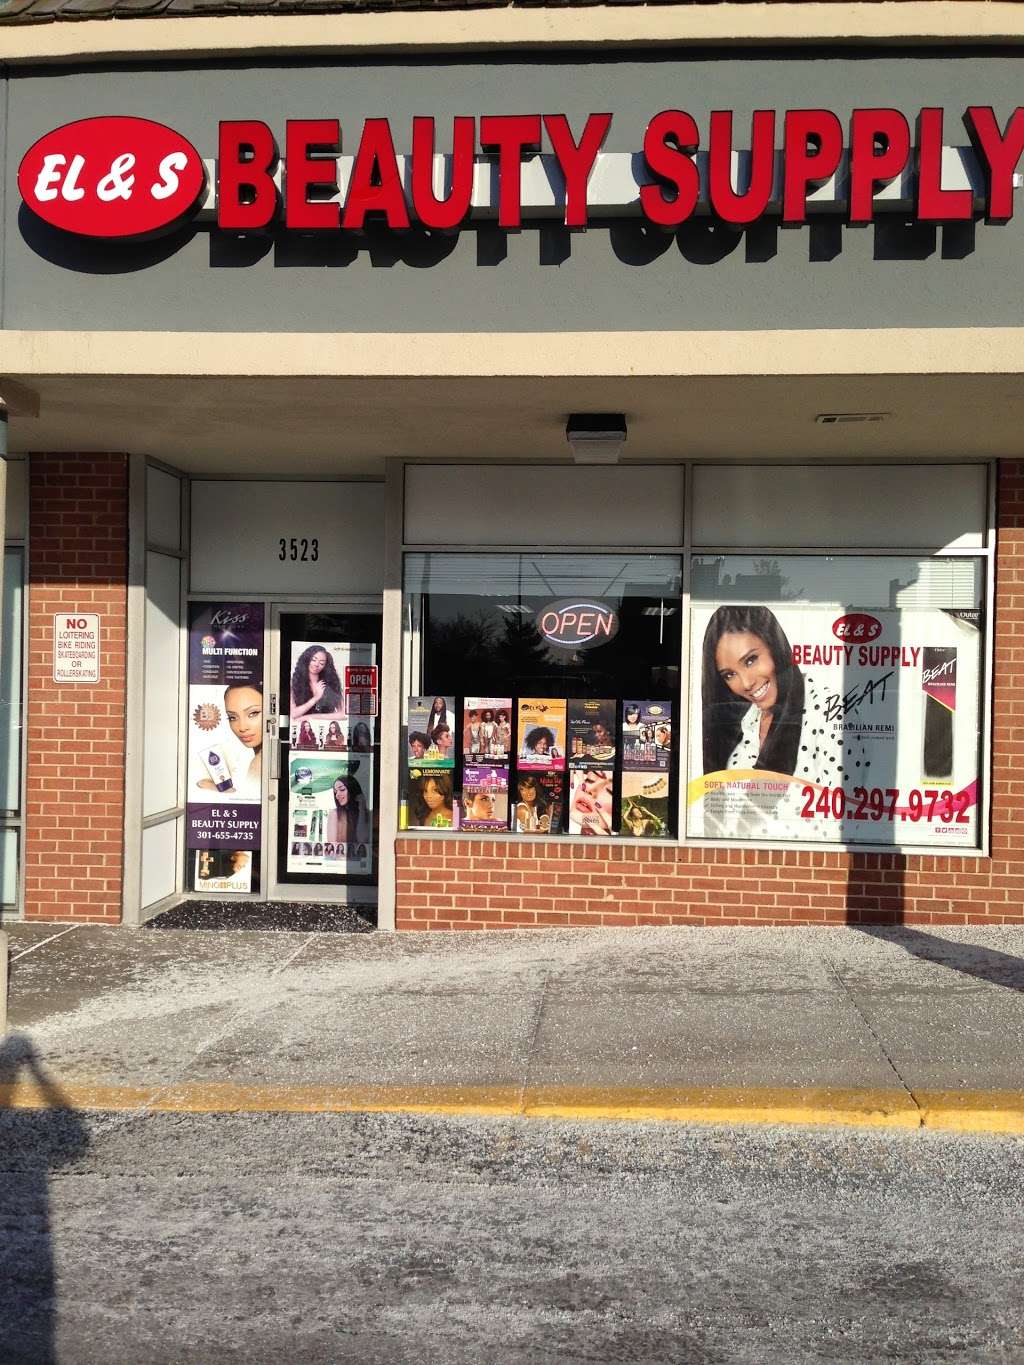 EL&S Beauty Supply | Retail Space 10 3523, Laurel Fort Meade Rd, Maryland City, MD 20724 | Phone: (240) 297-9732